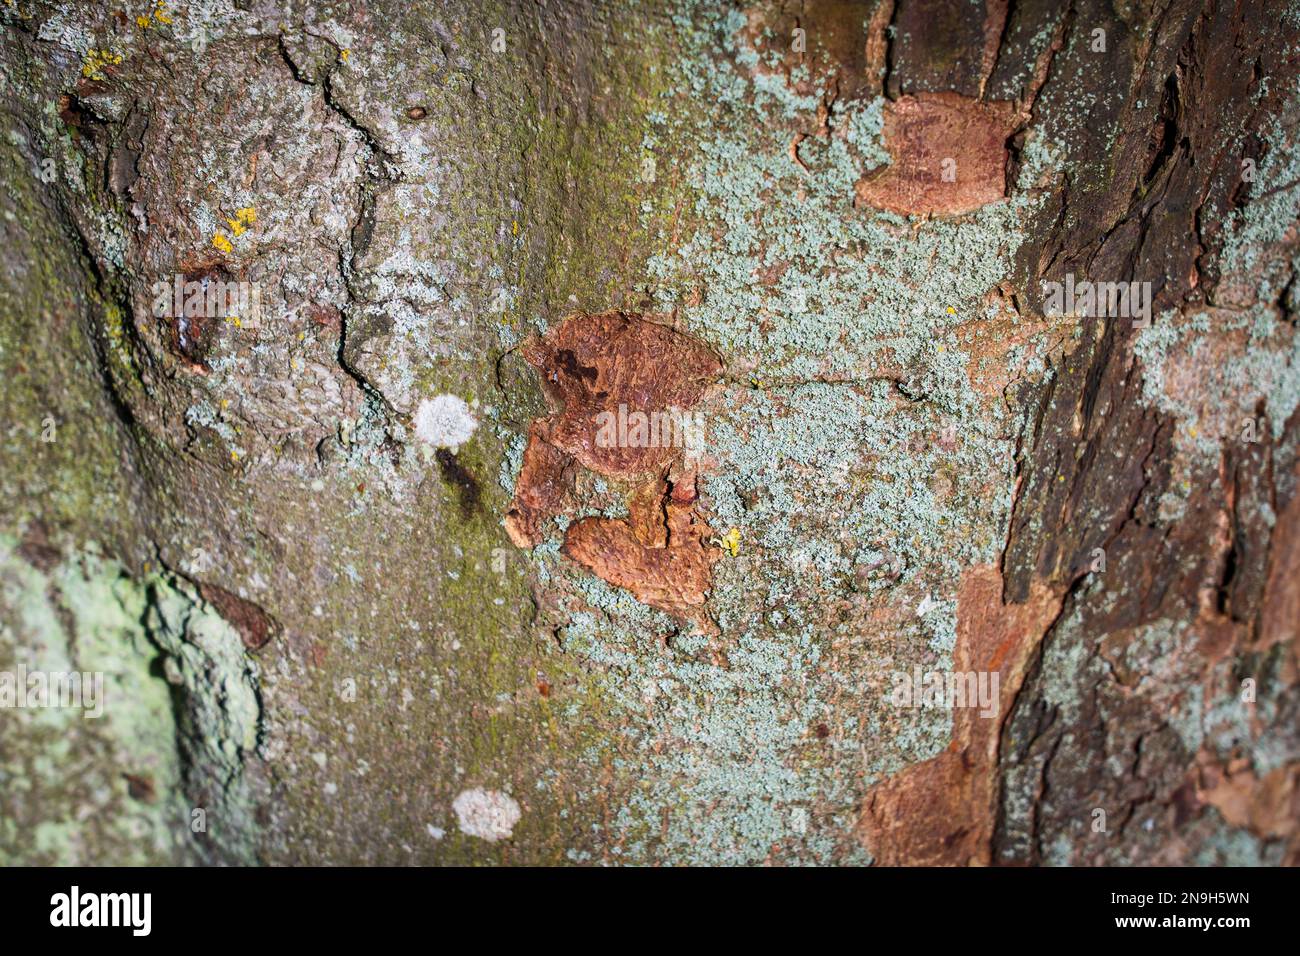 Tree bark abstract texture background pattern multi use abstract image Stock Photo